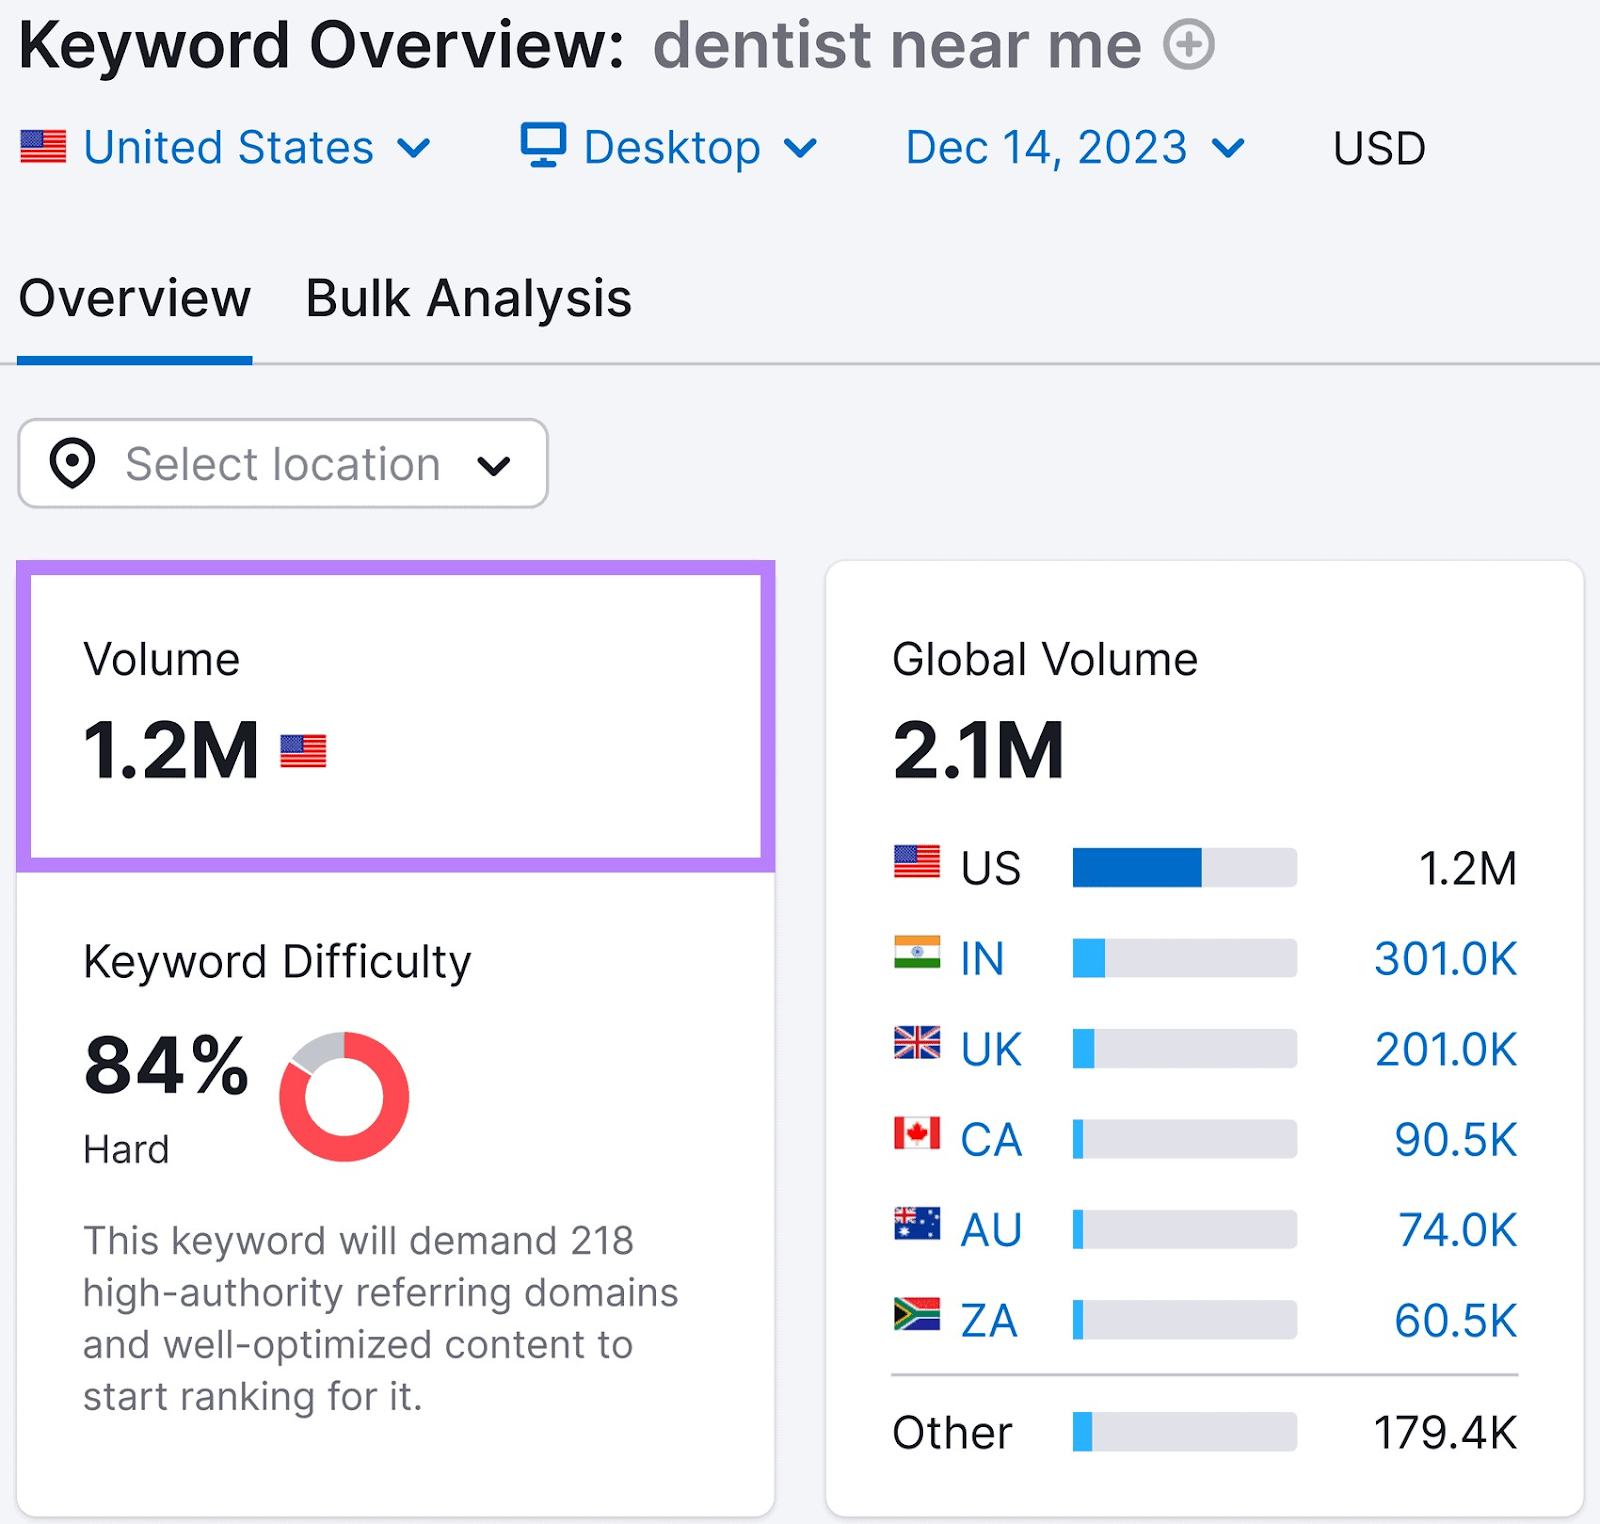 Volume metric shows 1.2M for “dentist near me” in Keyword Overview tool